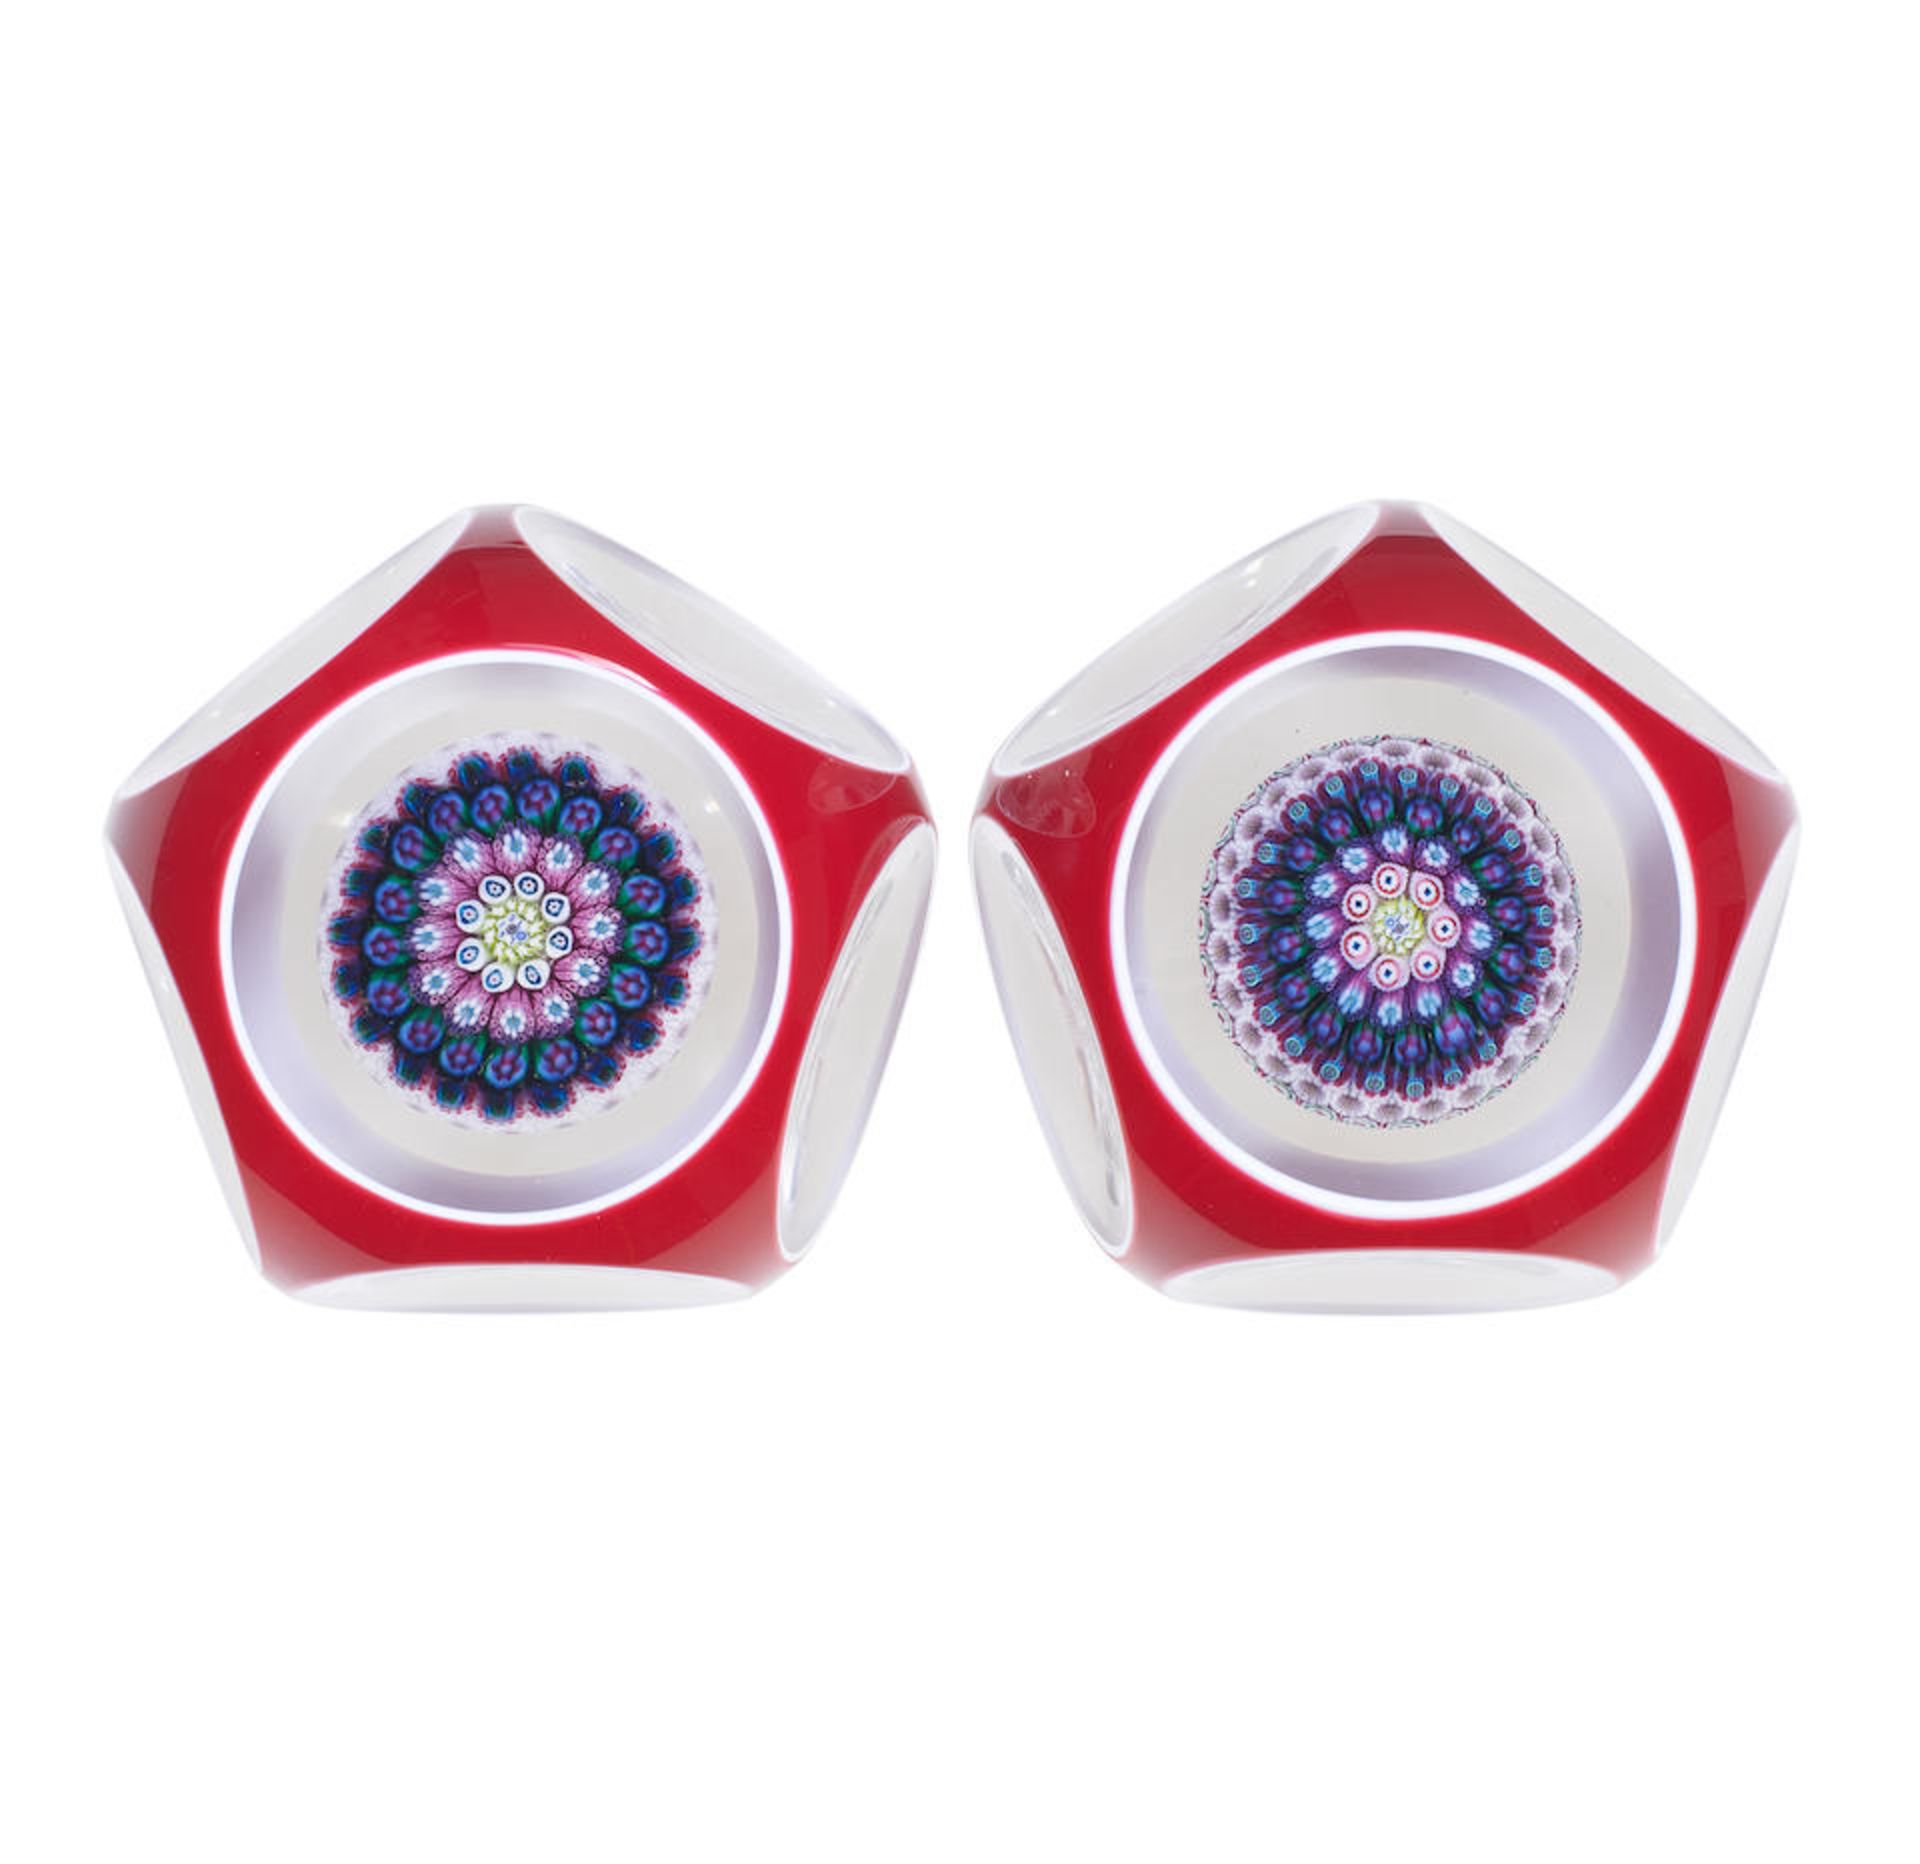 Two St Louis faceted double-overlay concentric millefiori mushroom paperweights, dated 1970